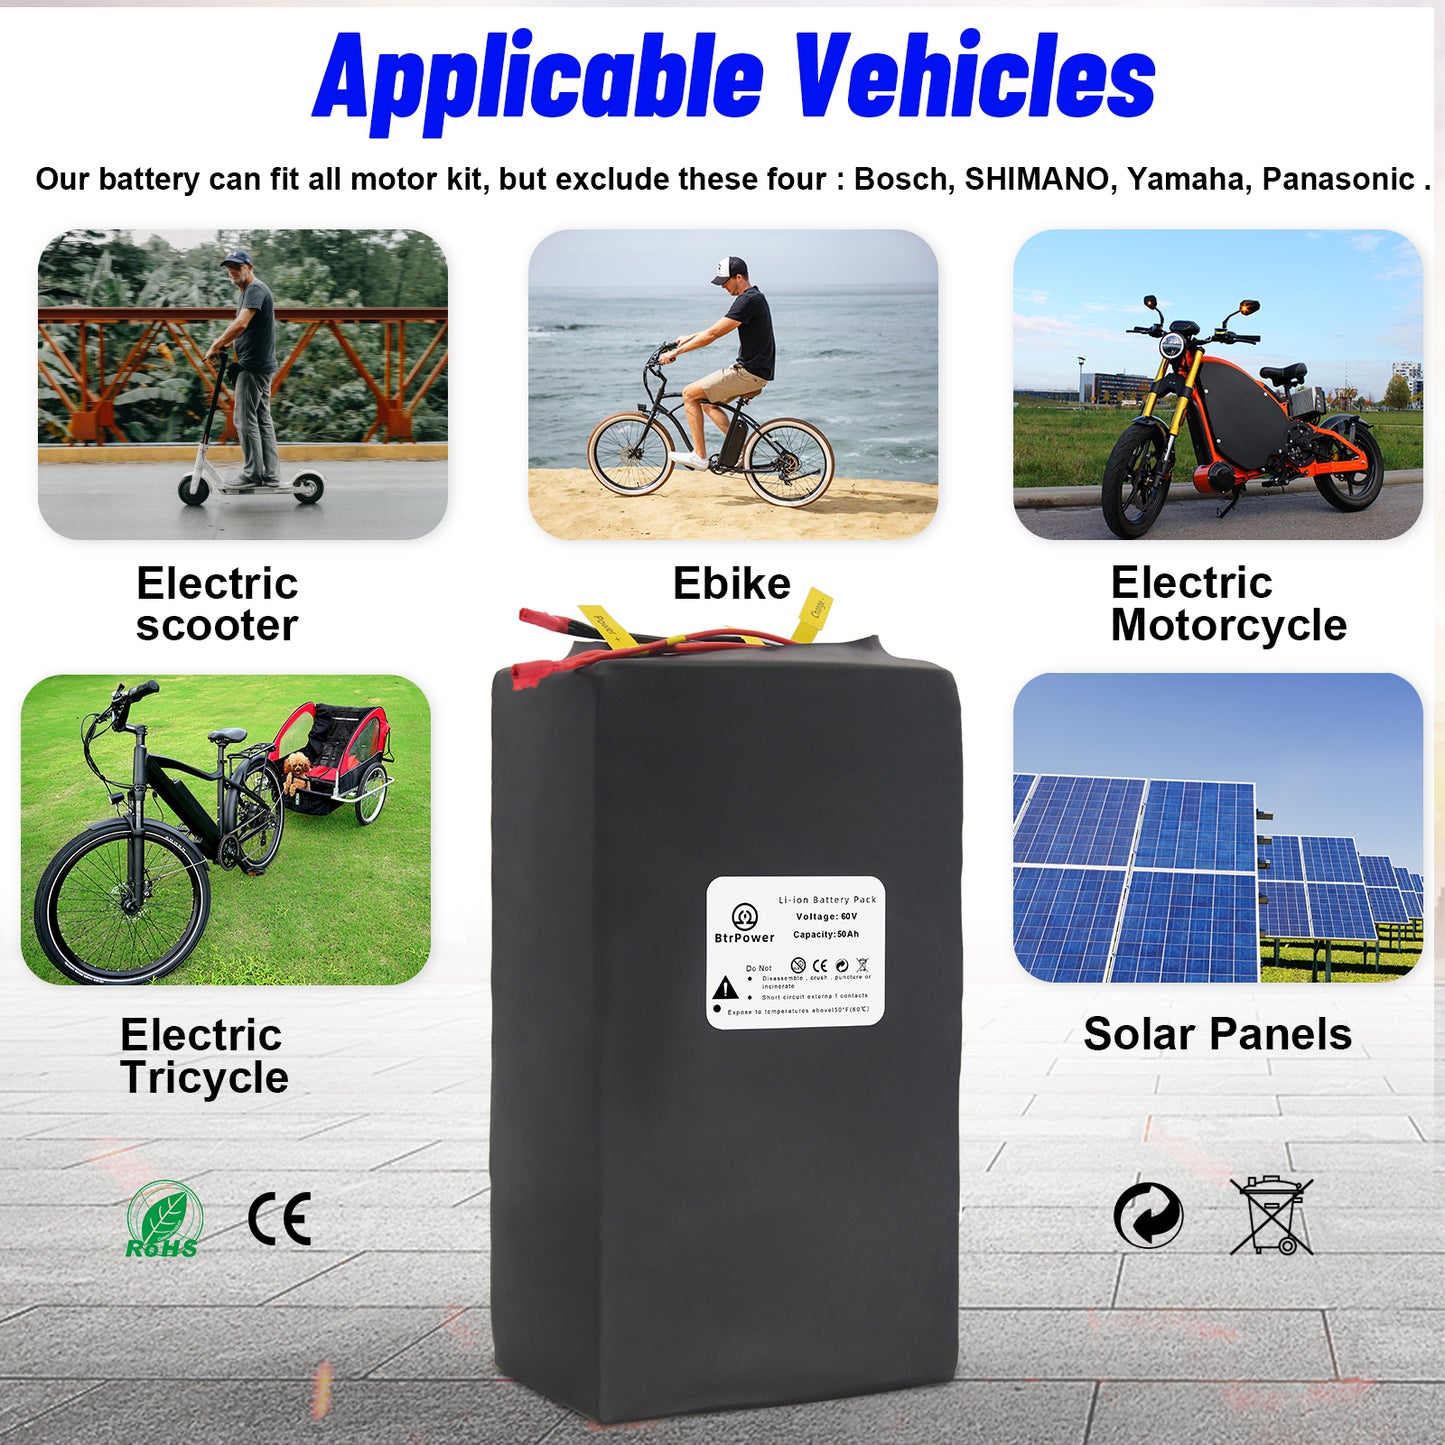 60V 50Ah Lifepo4 Battery Pack for Ebike Electric Scooter 3000W with 5A Charger